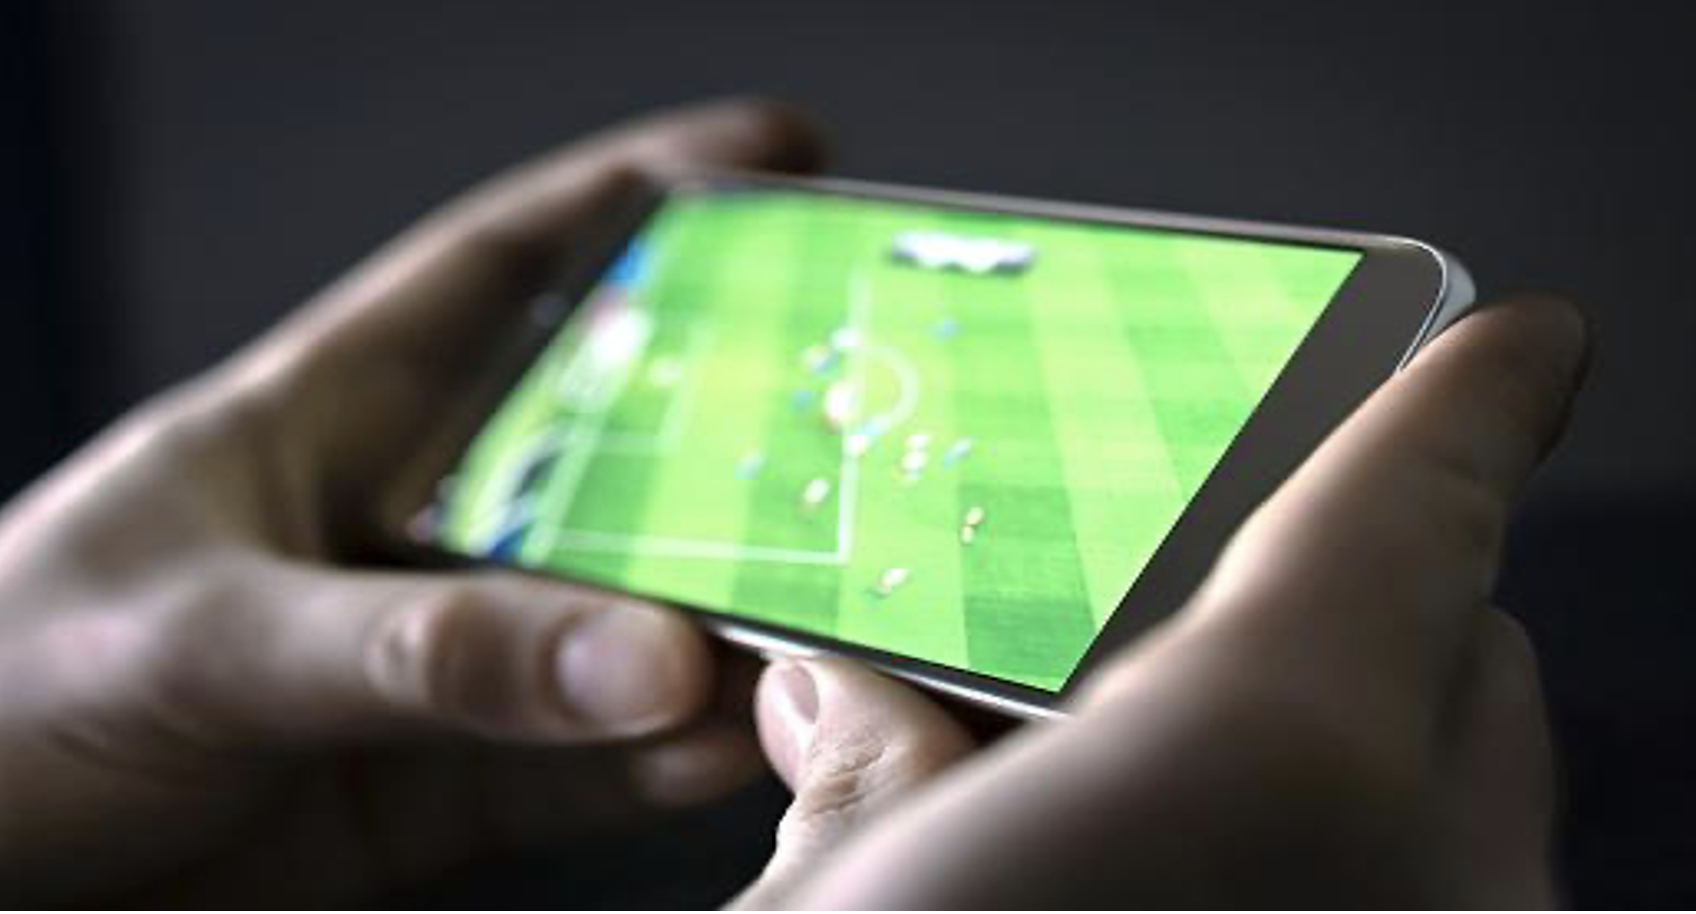 Sports apps dominating the data, information and gaming landscape